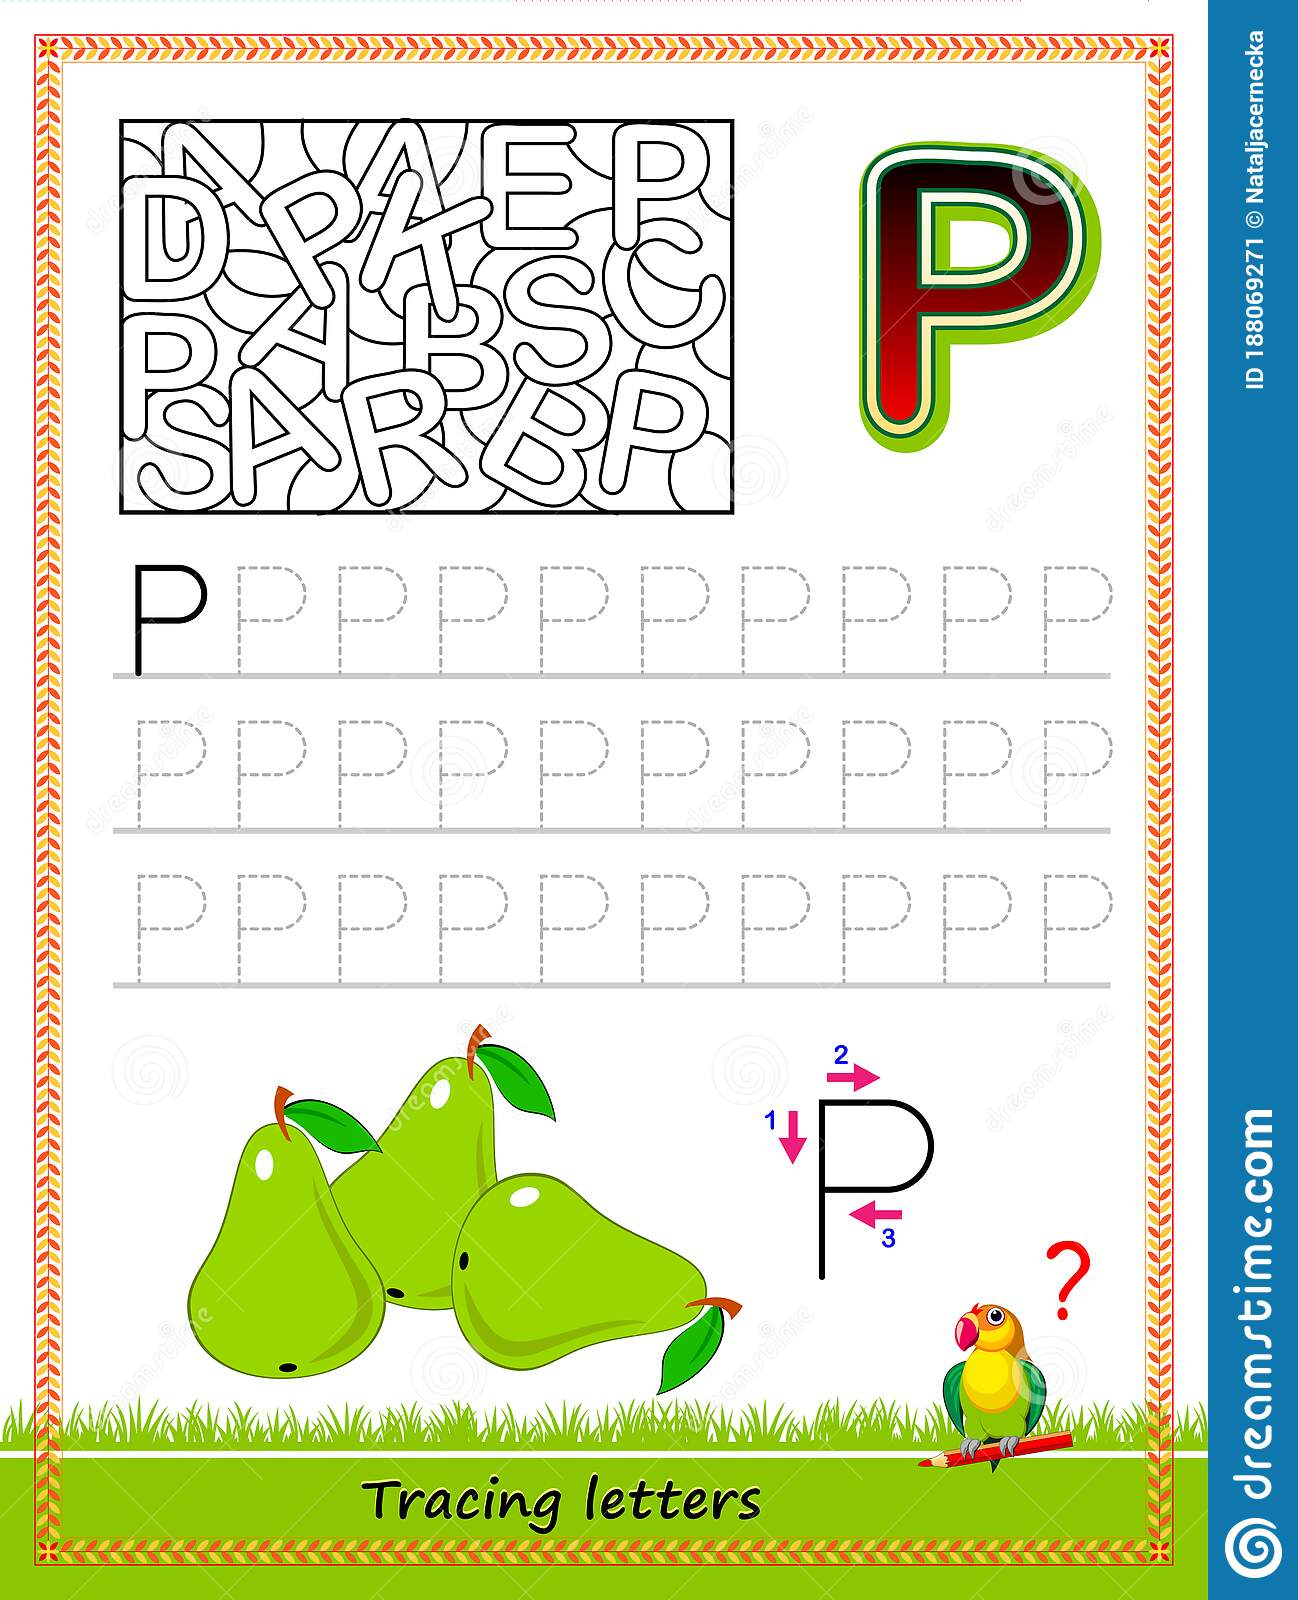 Worksheet For Tracing Letters. Find And Paint All Letters P